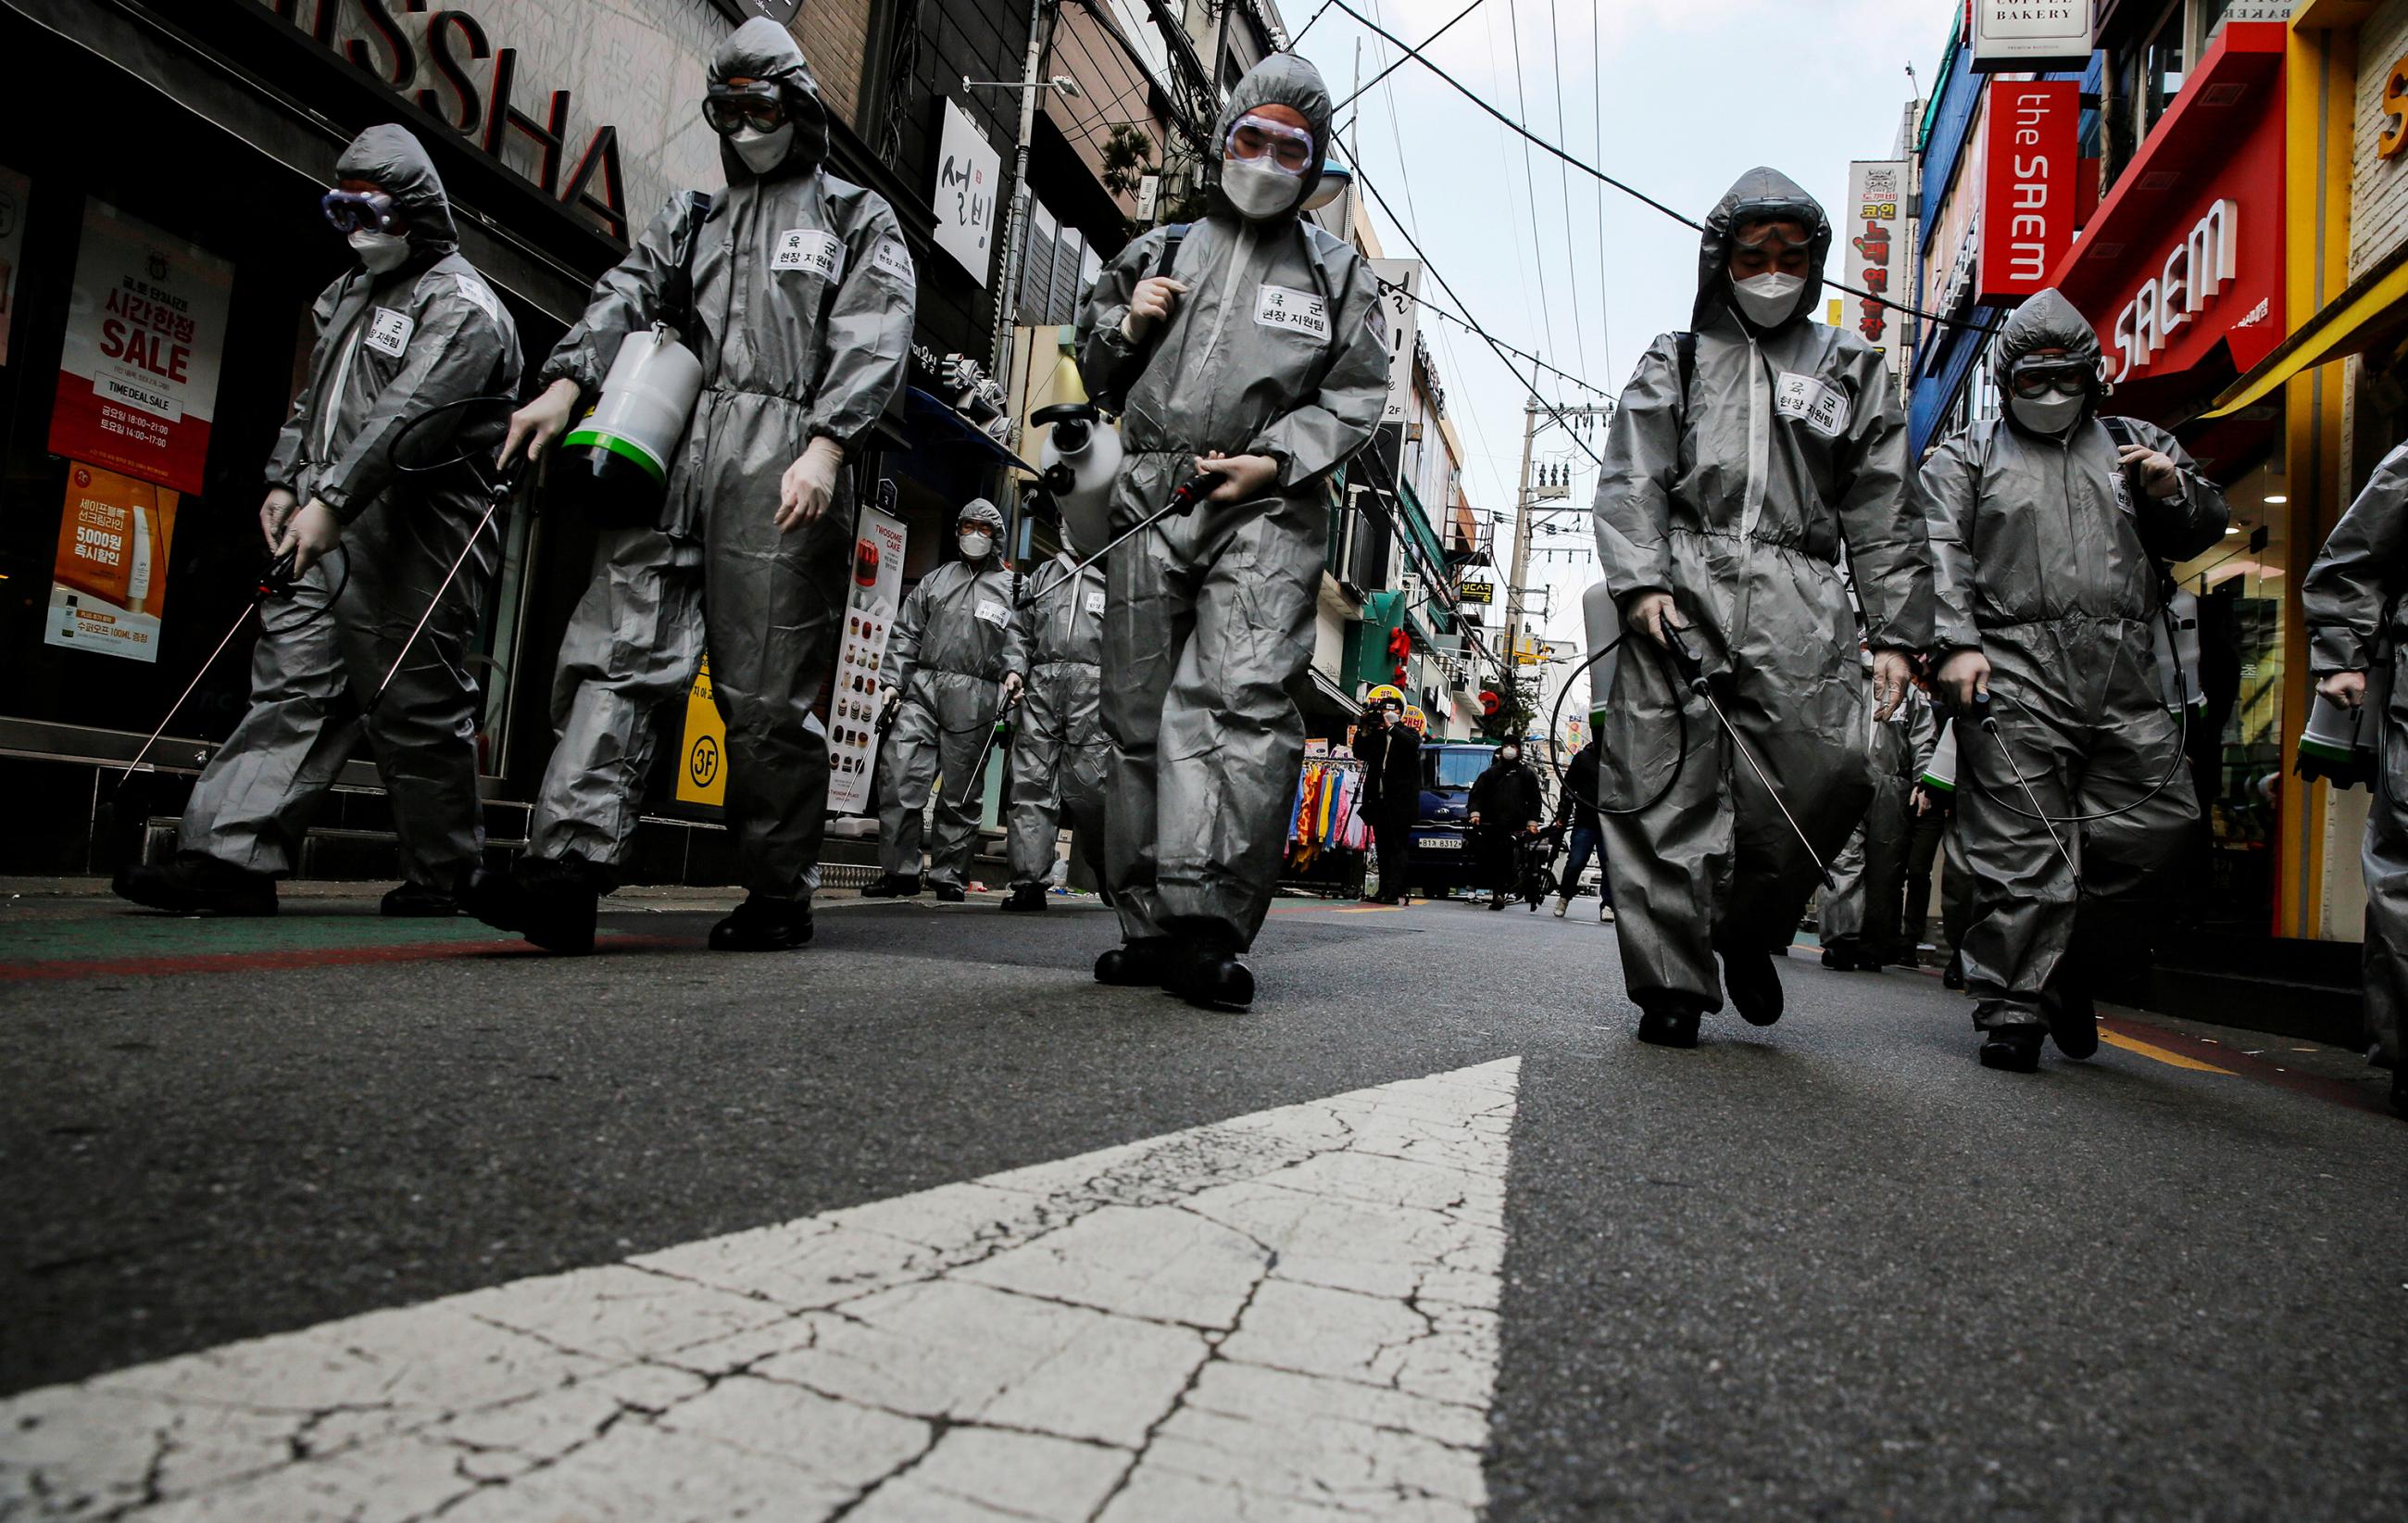 The image is striking showing the soldiers dressed in silver space-suit looking protective gear walking down a more or less abandoned street in what appears to be a normally busy shopping district. 